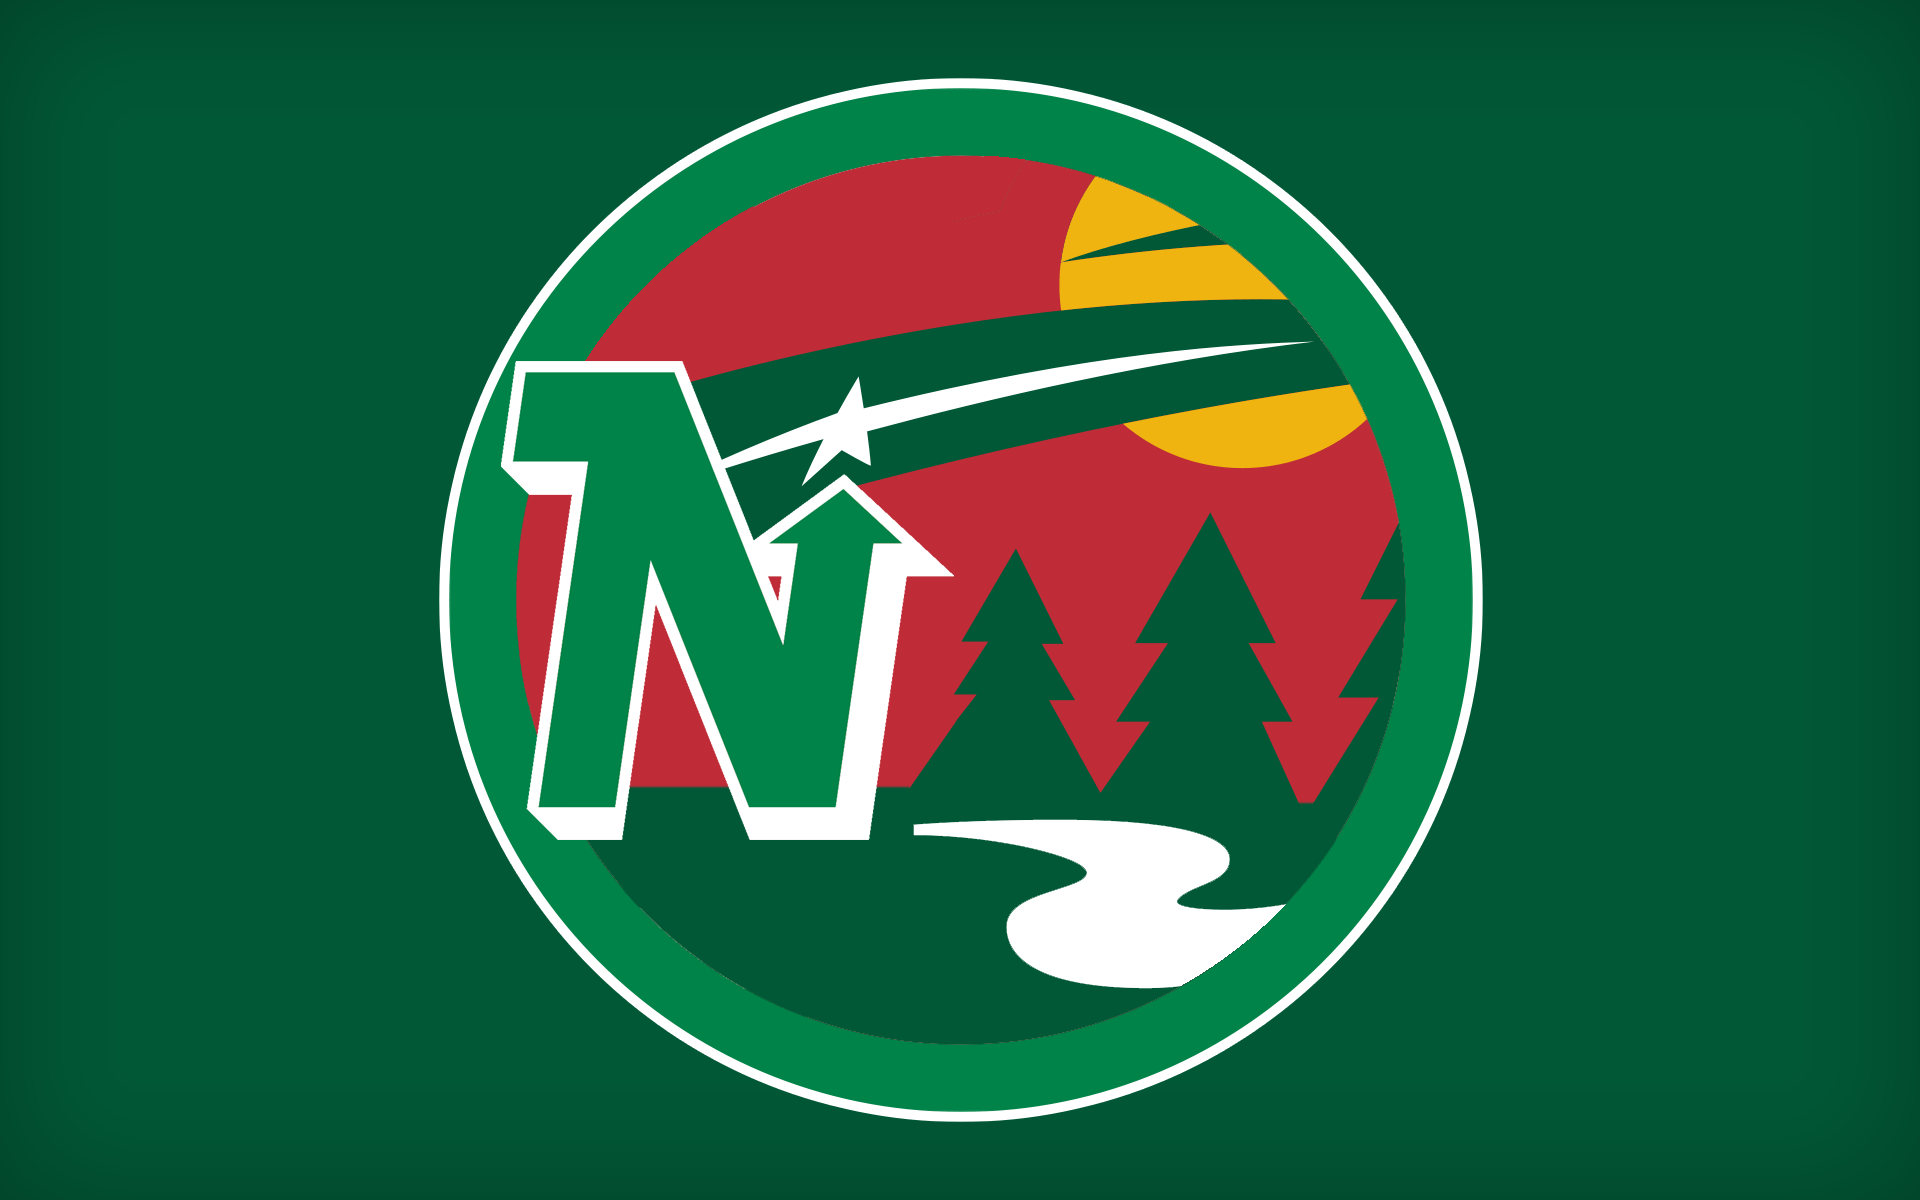 BarDown: Some of these NHL team logo mashups are better than